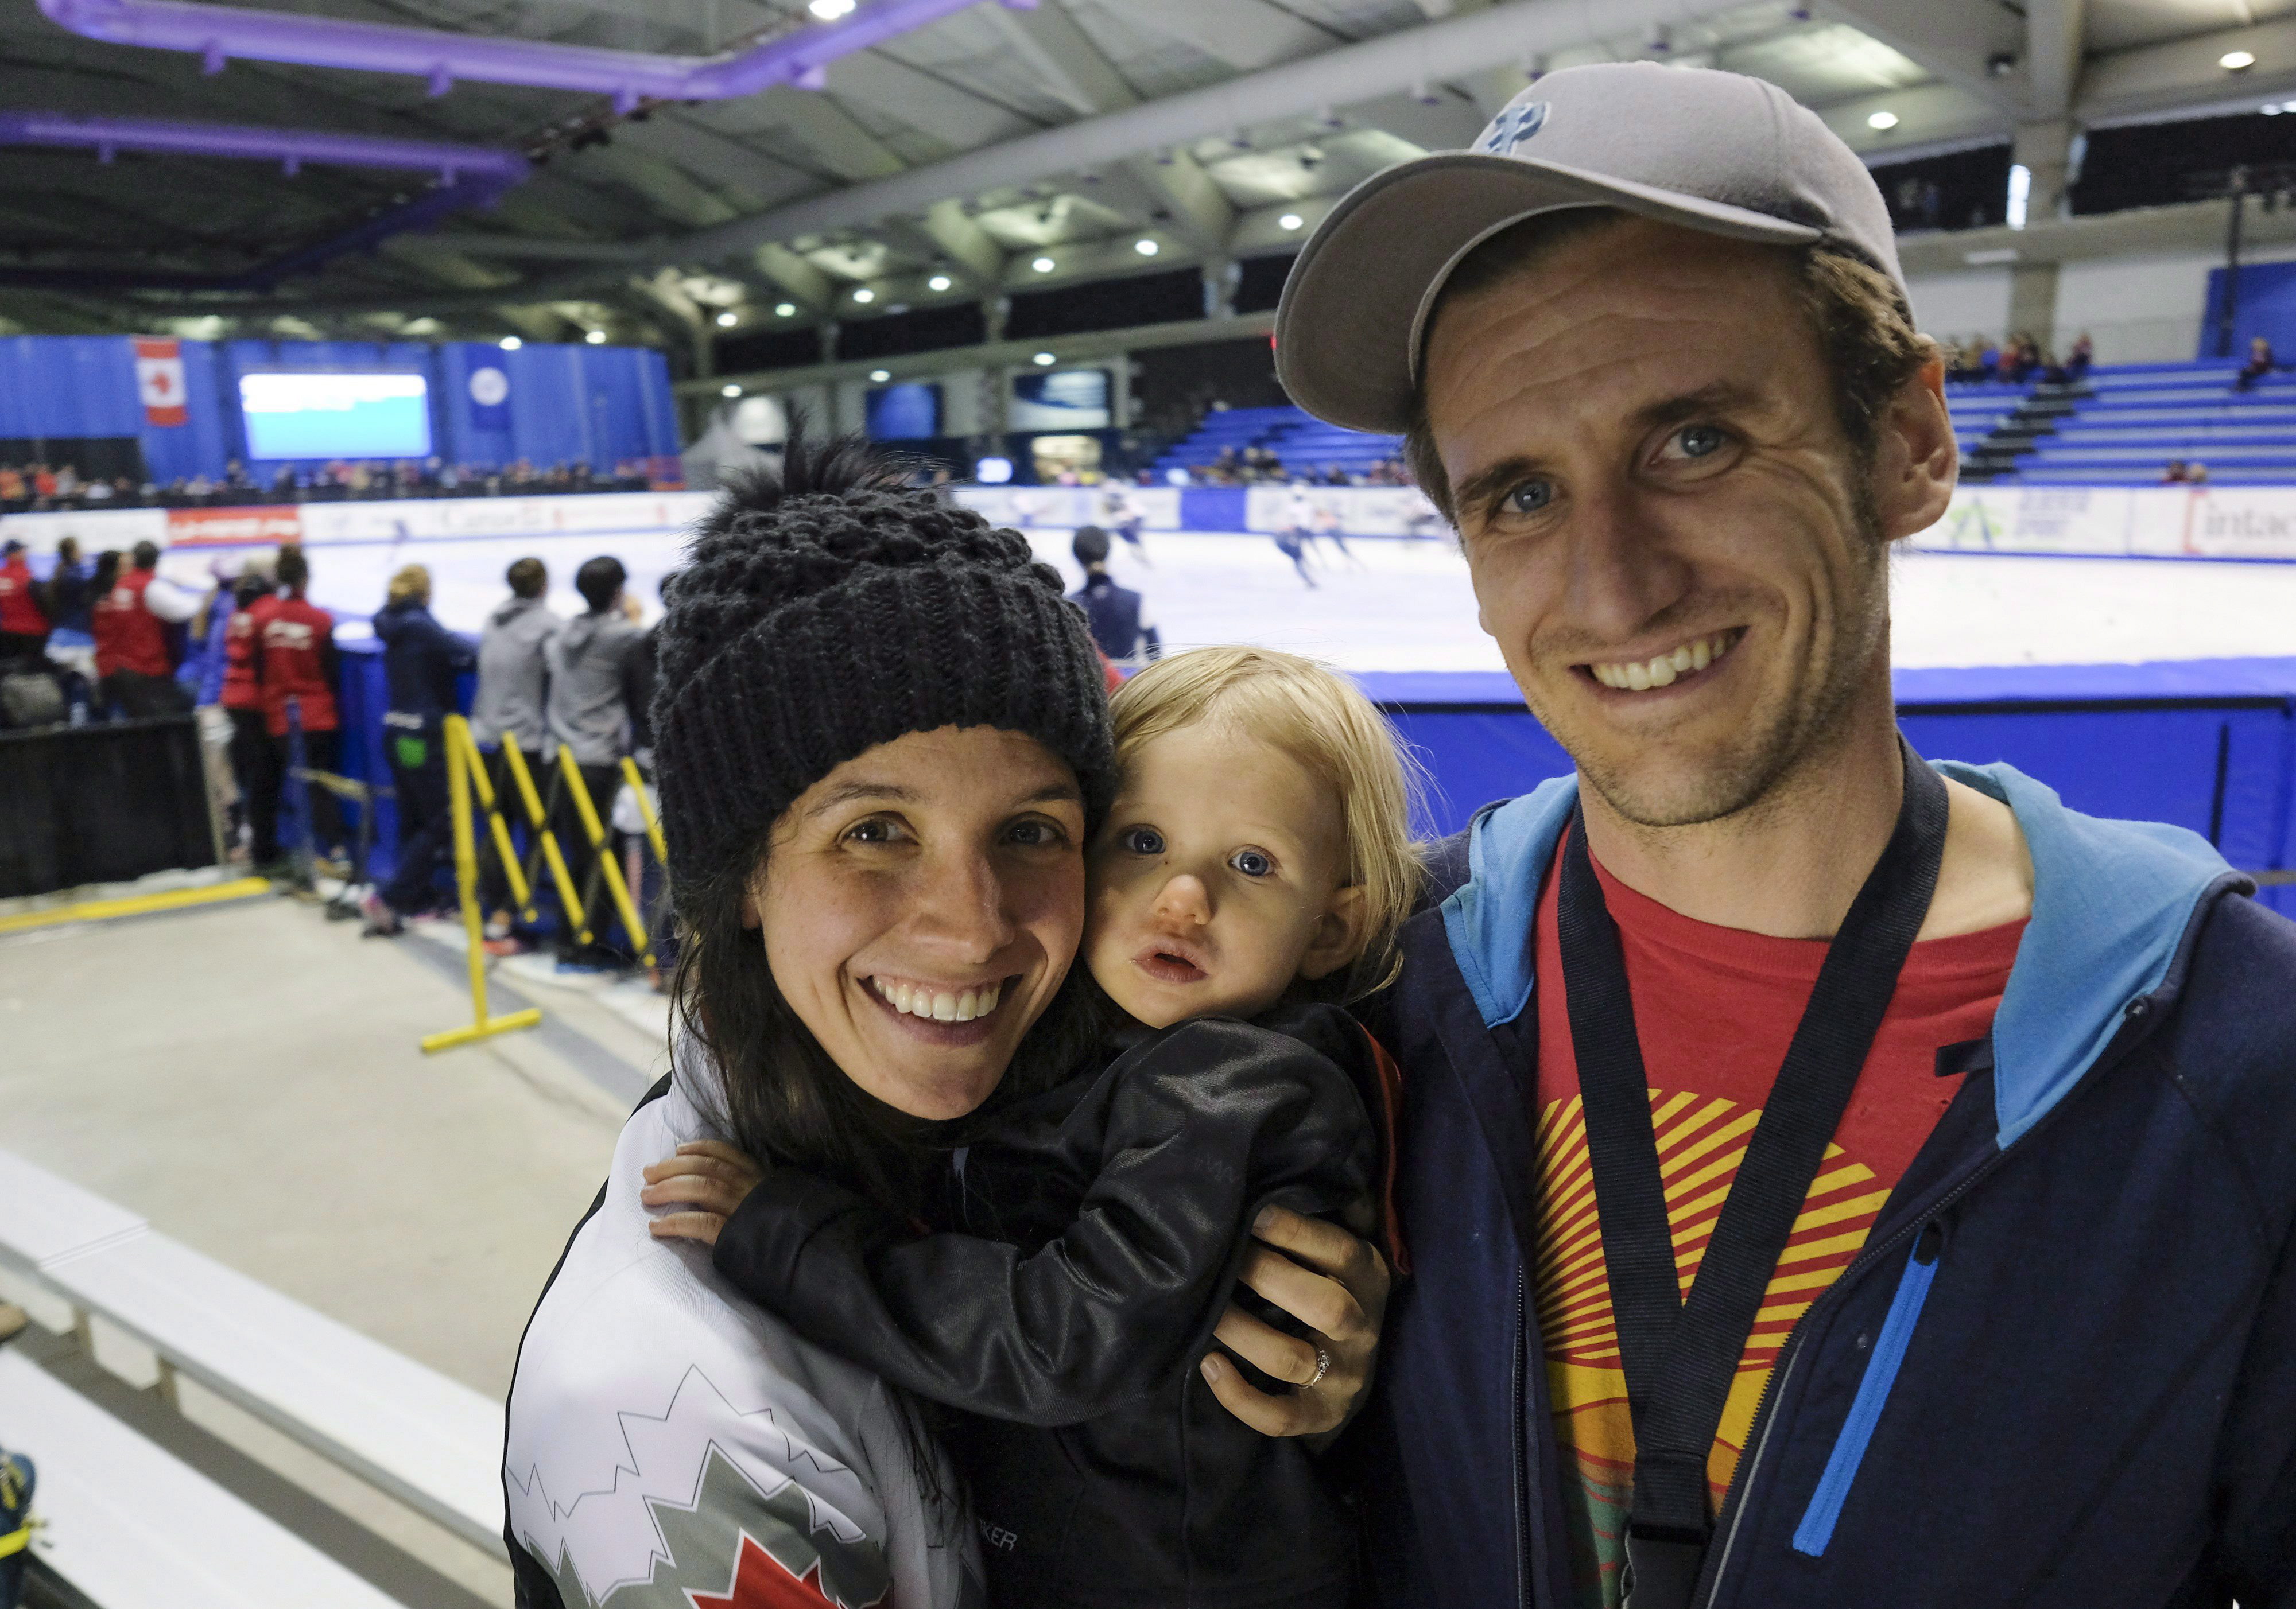 Canada's Marie-Eve Drolet, left, holds her daughter Zoey Crysler, 22 months, with her husband Corey Crysler at the ISU World Cup short track speed skating event in Calgary, Alta., Friday, Nov. 4, 2016.THE CANADIAN PRESS/Jeff McIntosh